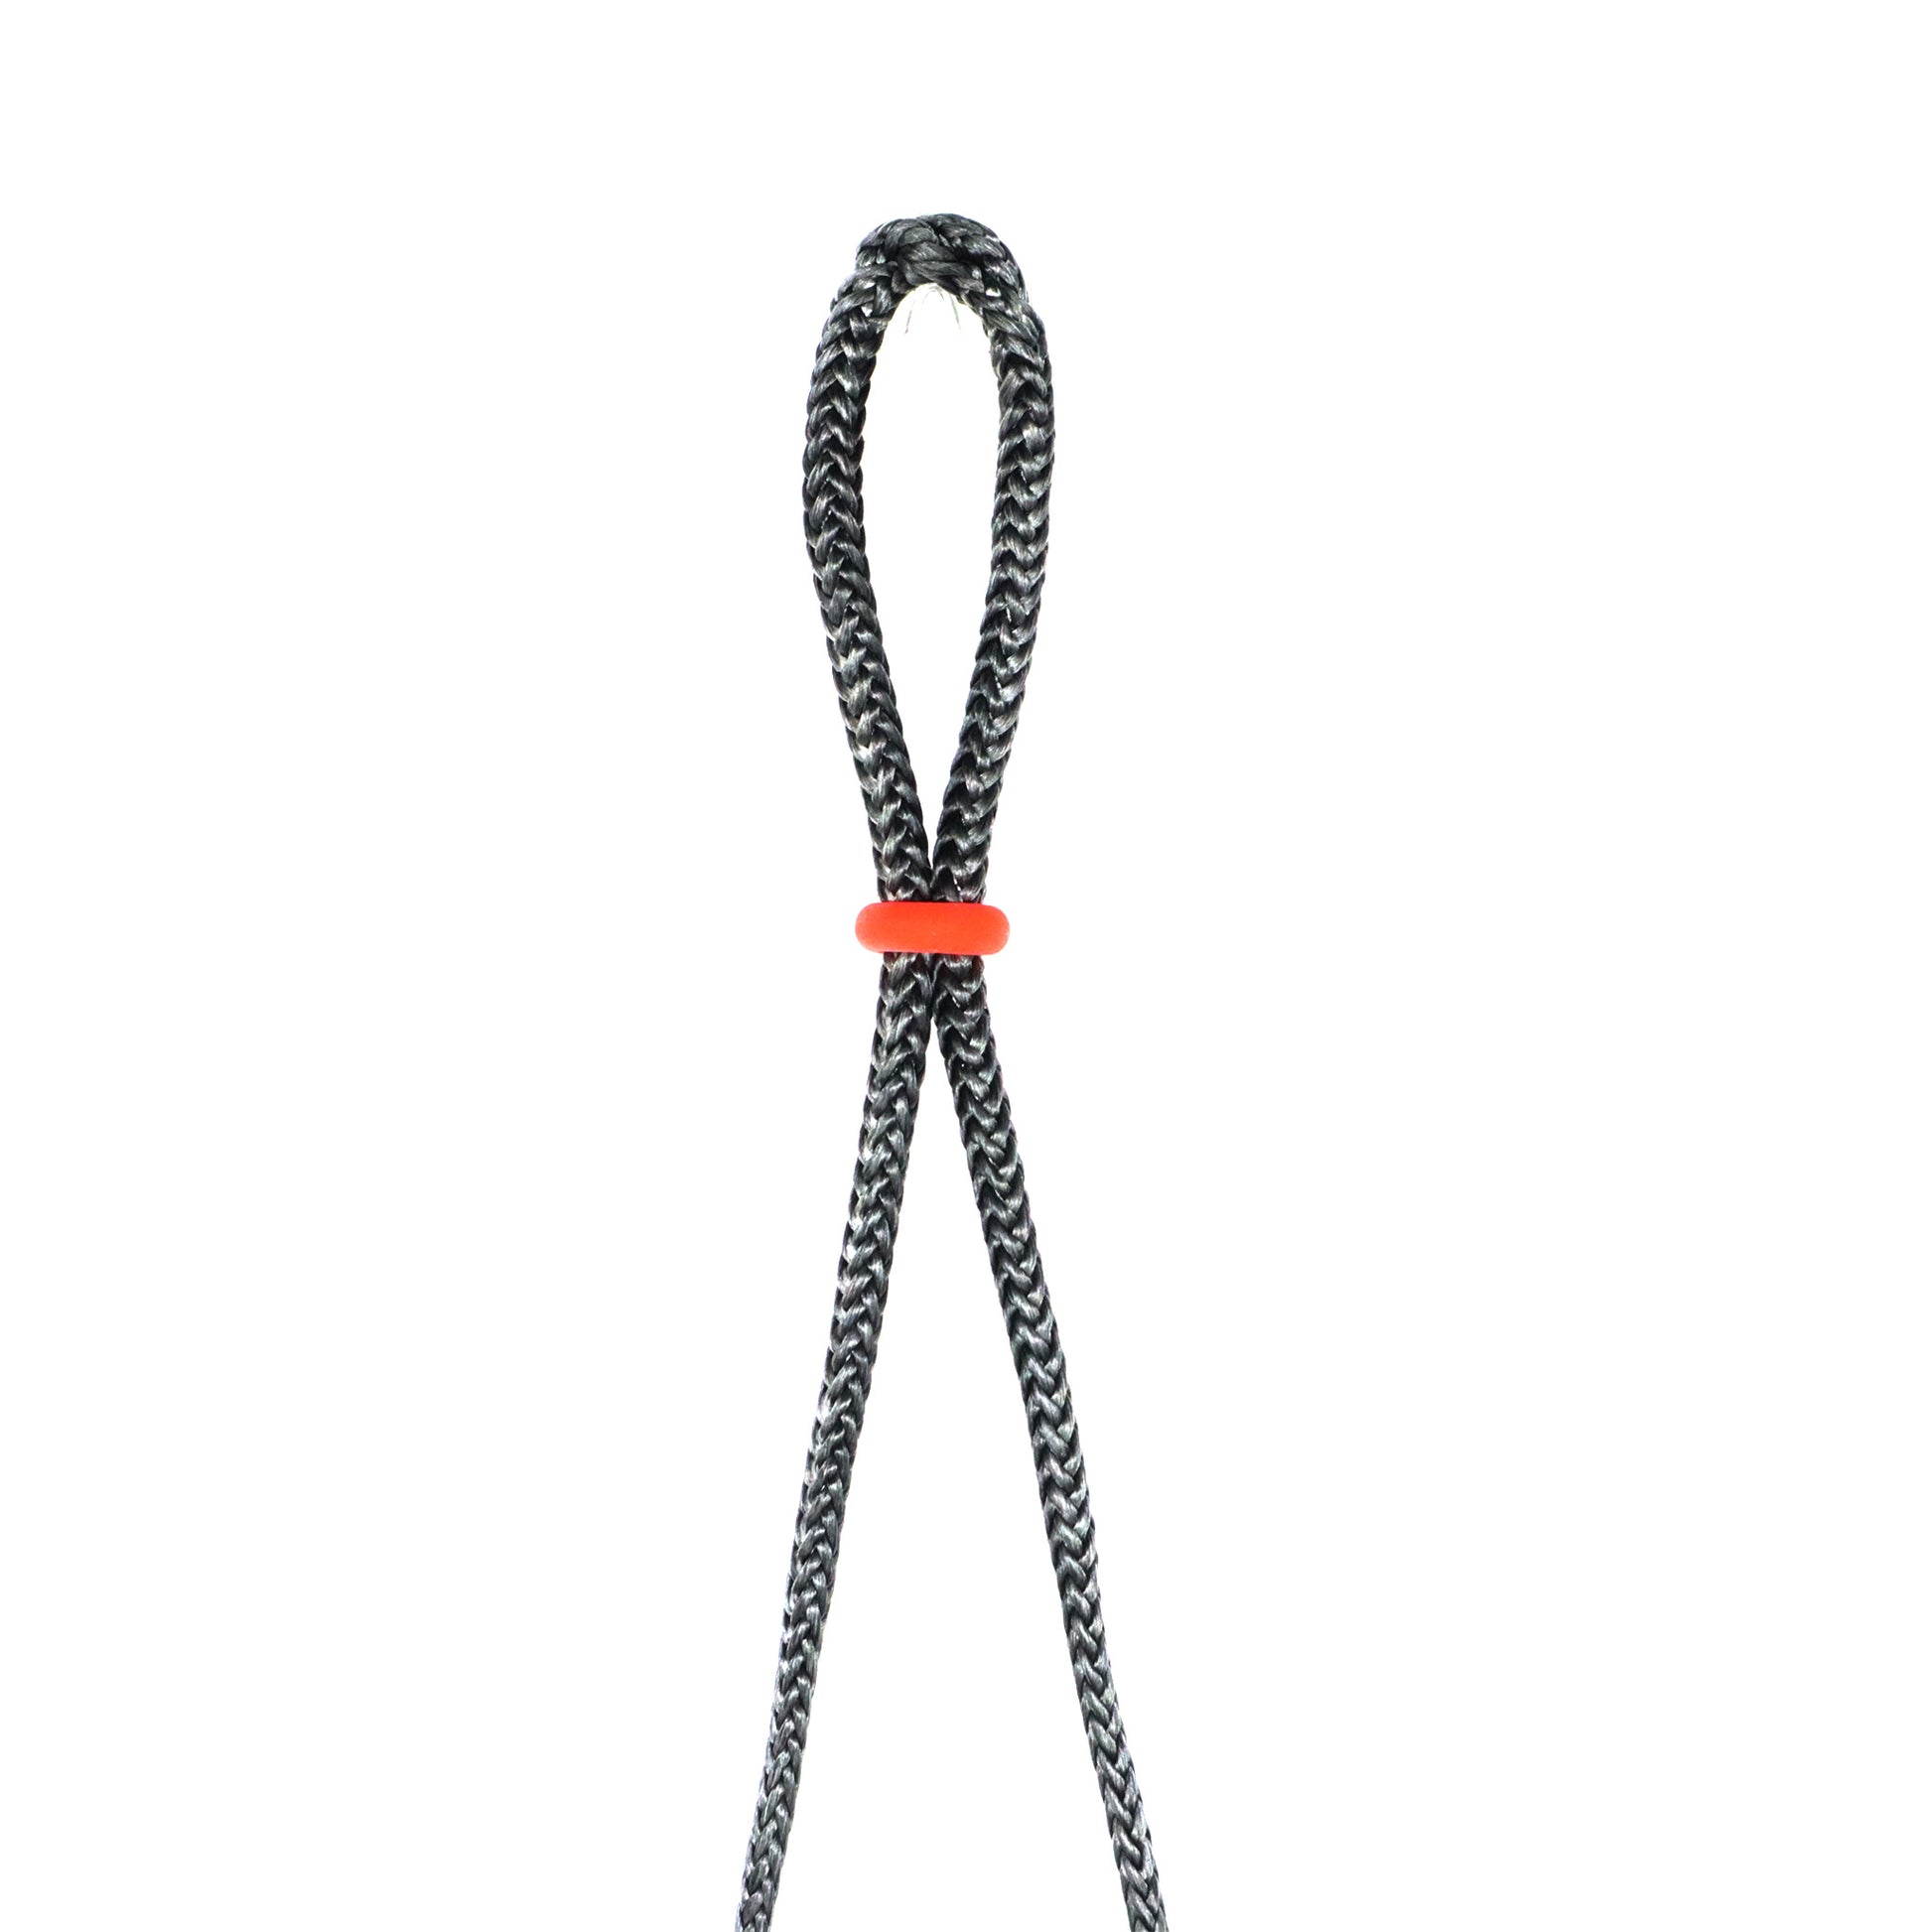 Hang Free Double Step Amsteel Cinch Aider